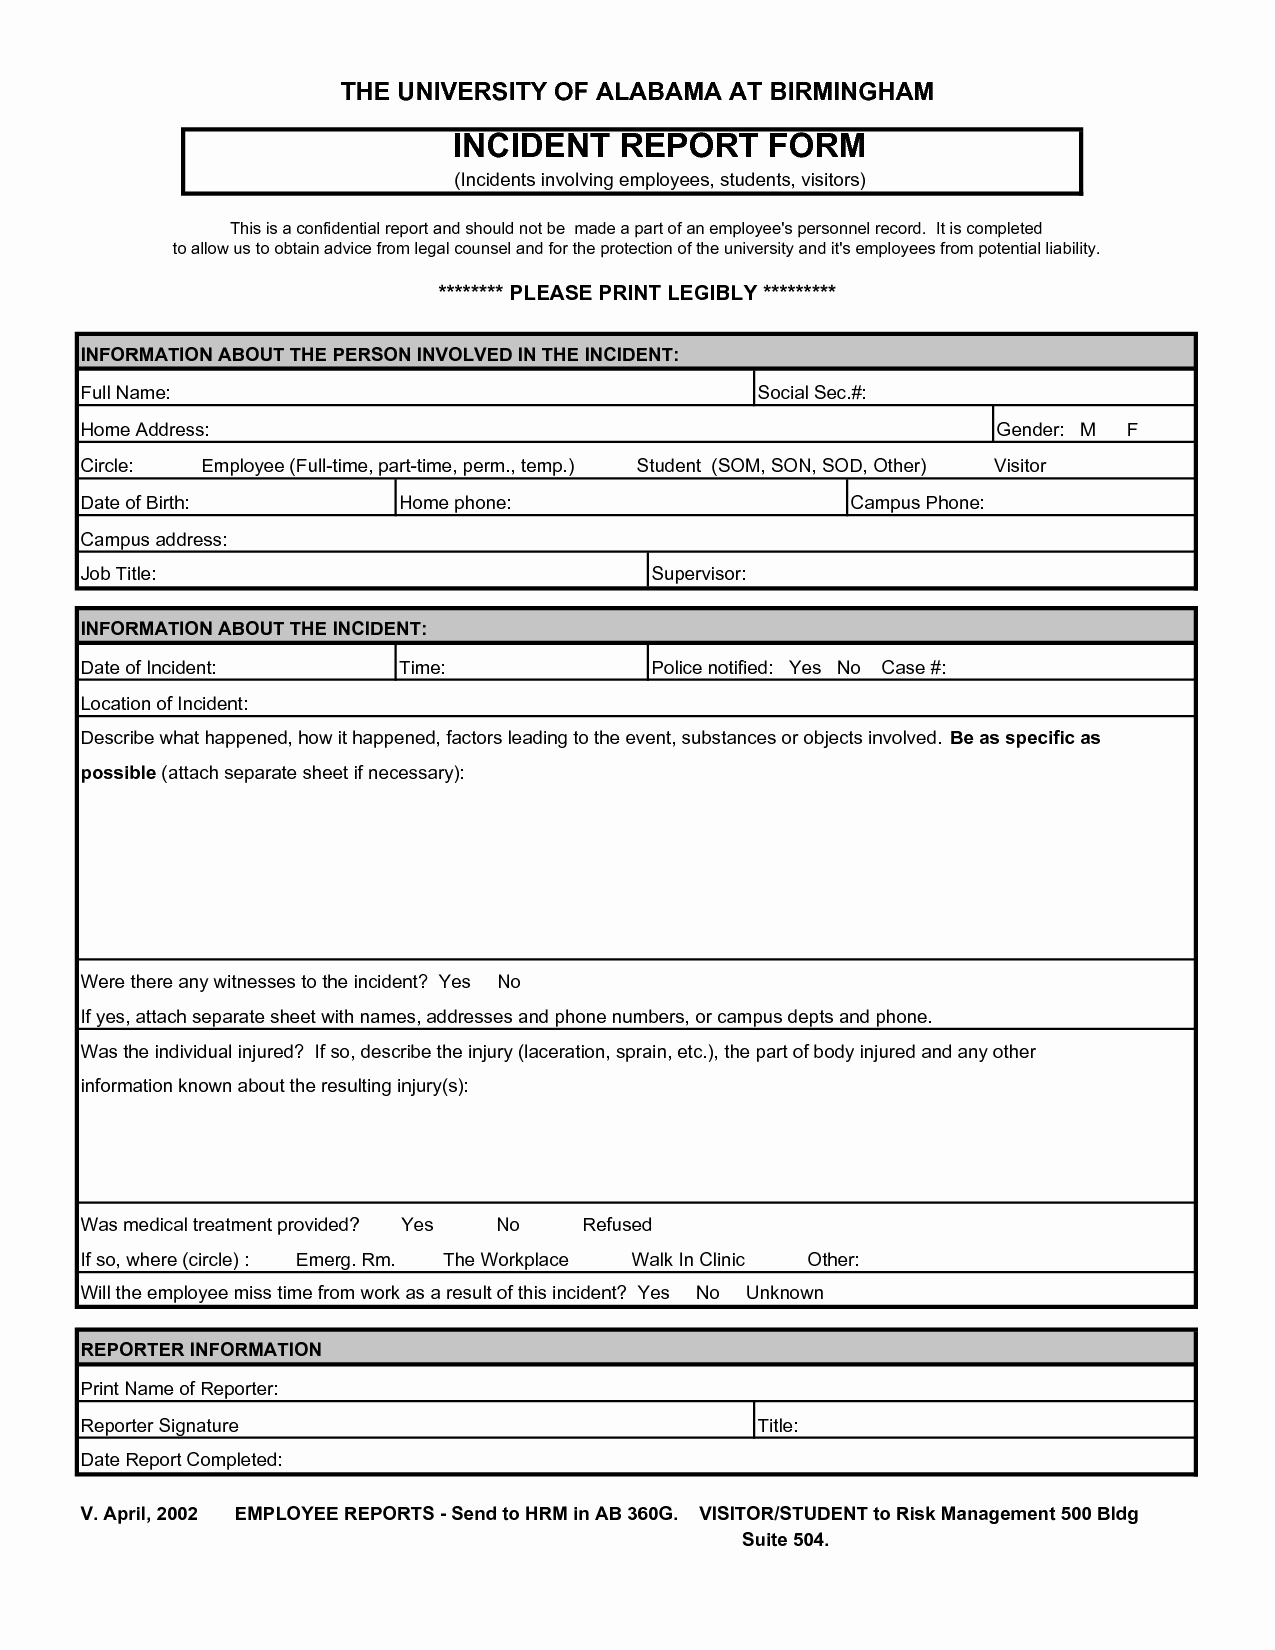 Accident Reporting form Template Lovely 13 Incident Report Templates Excel Pdf formats